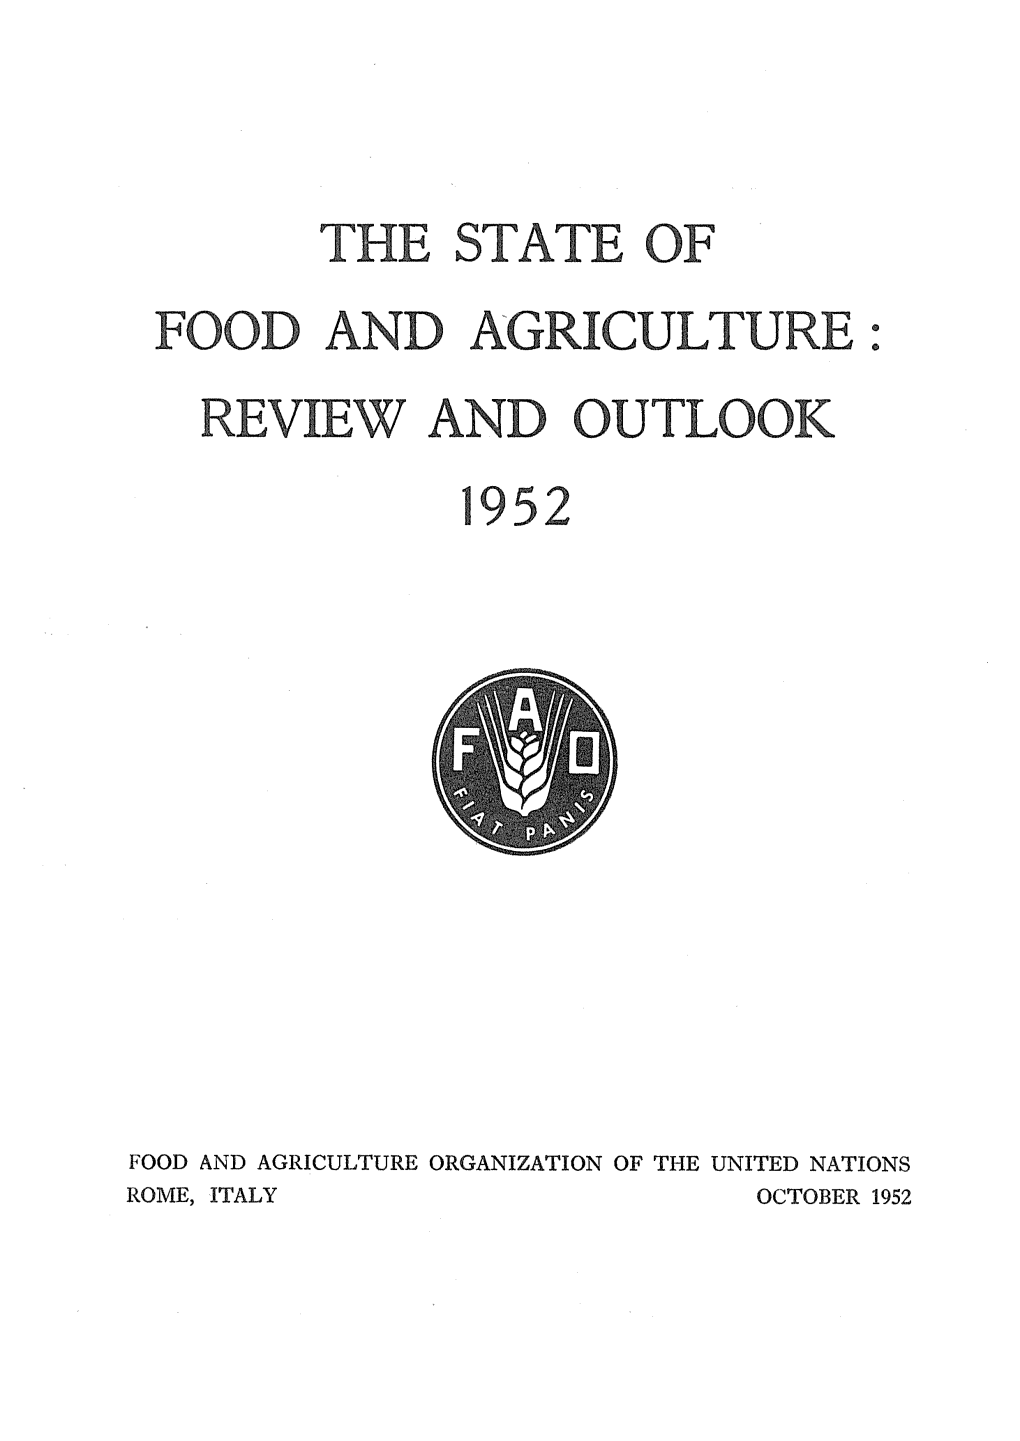 The State of Food and Agriculture, 1952